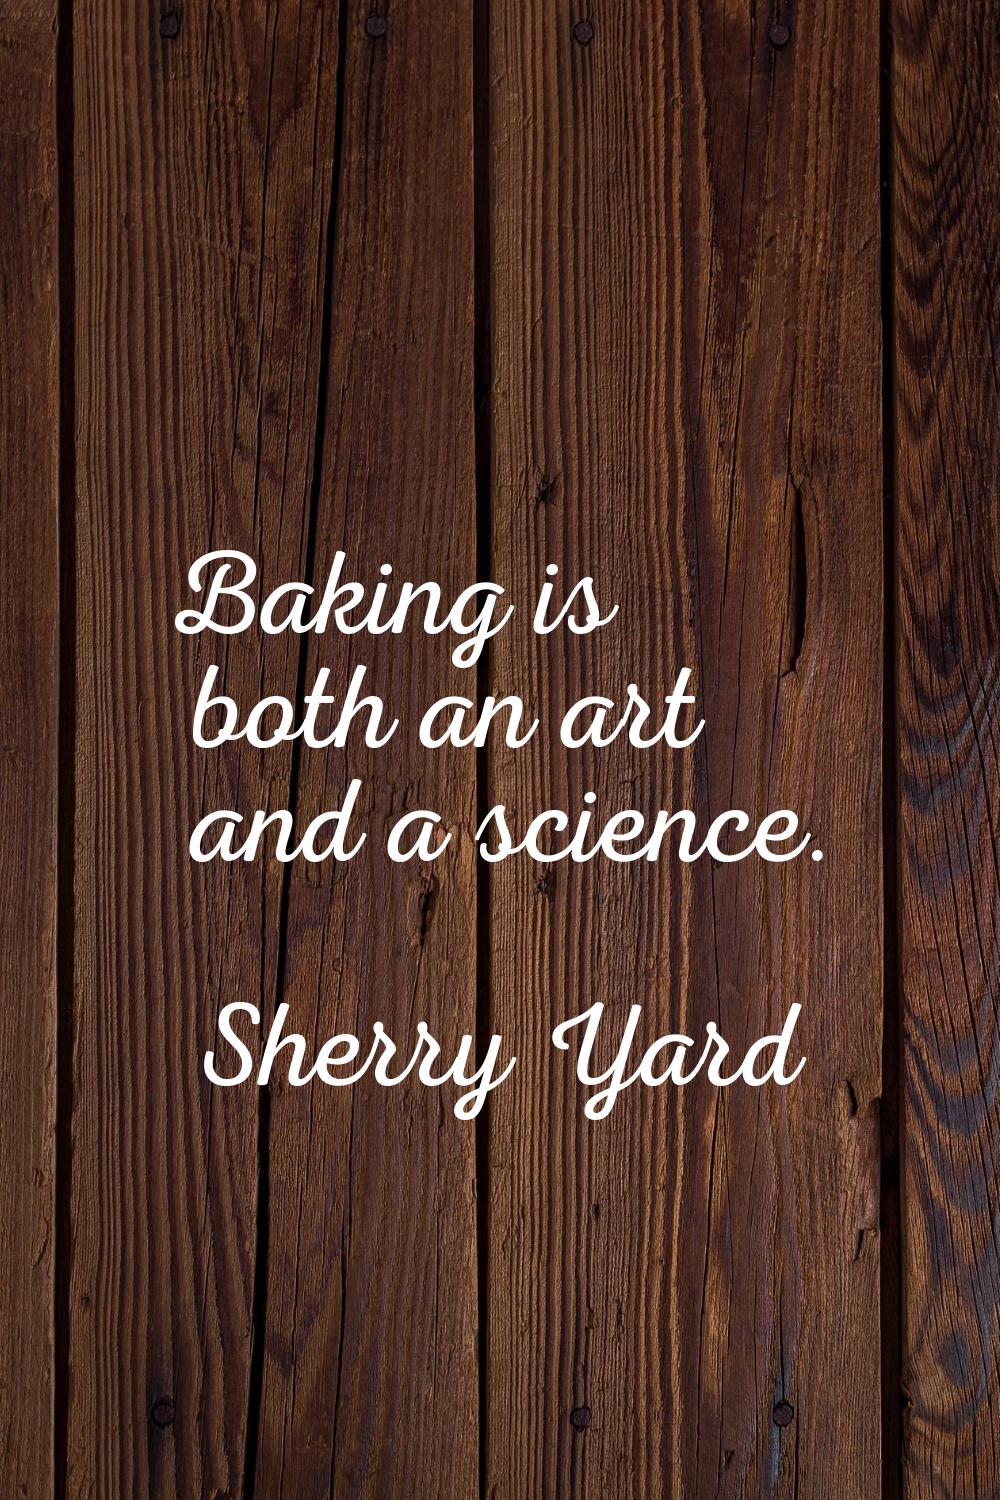 Baking is both an art and a science.